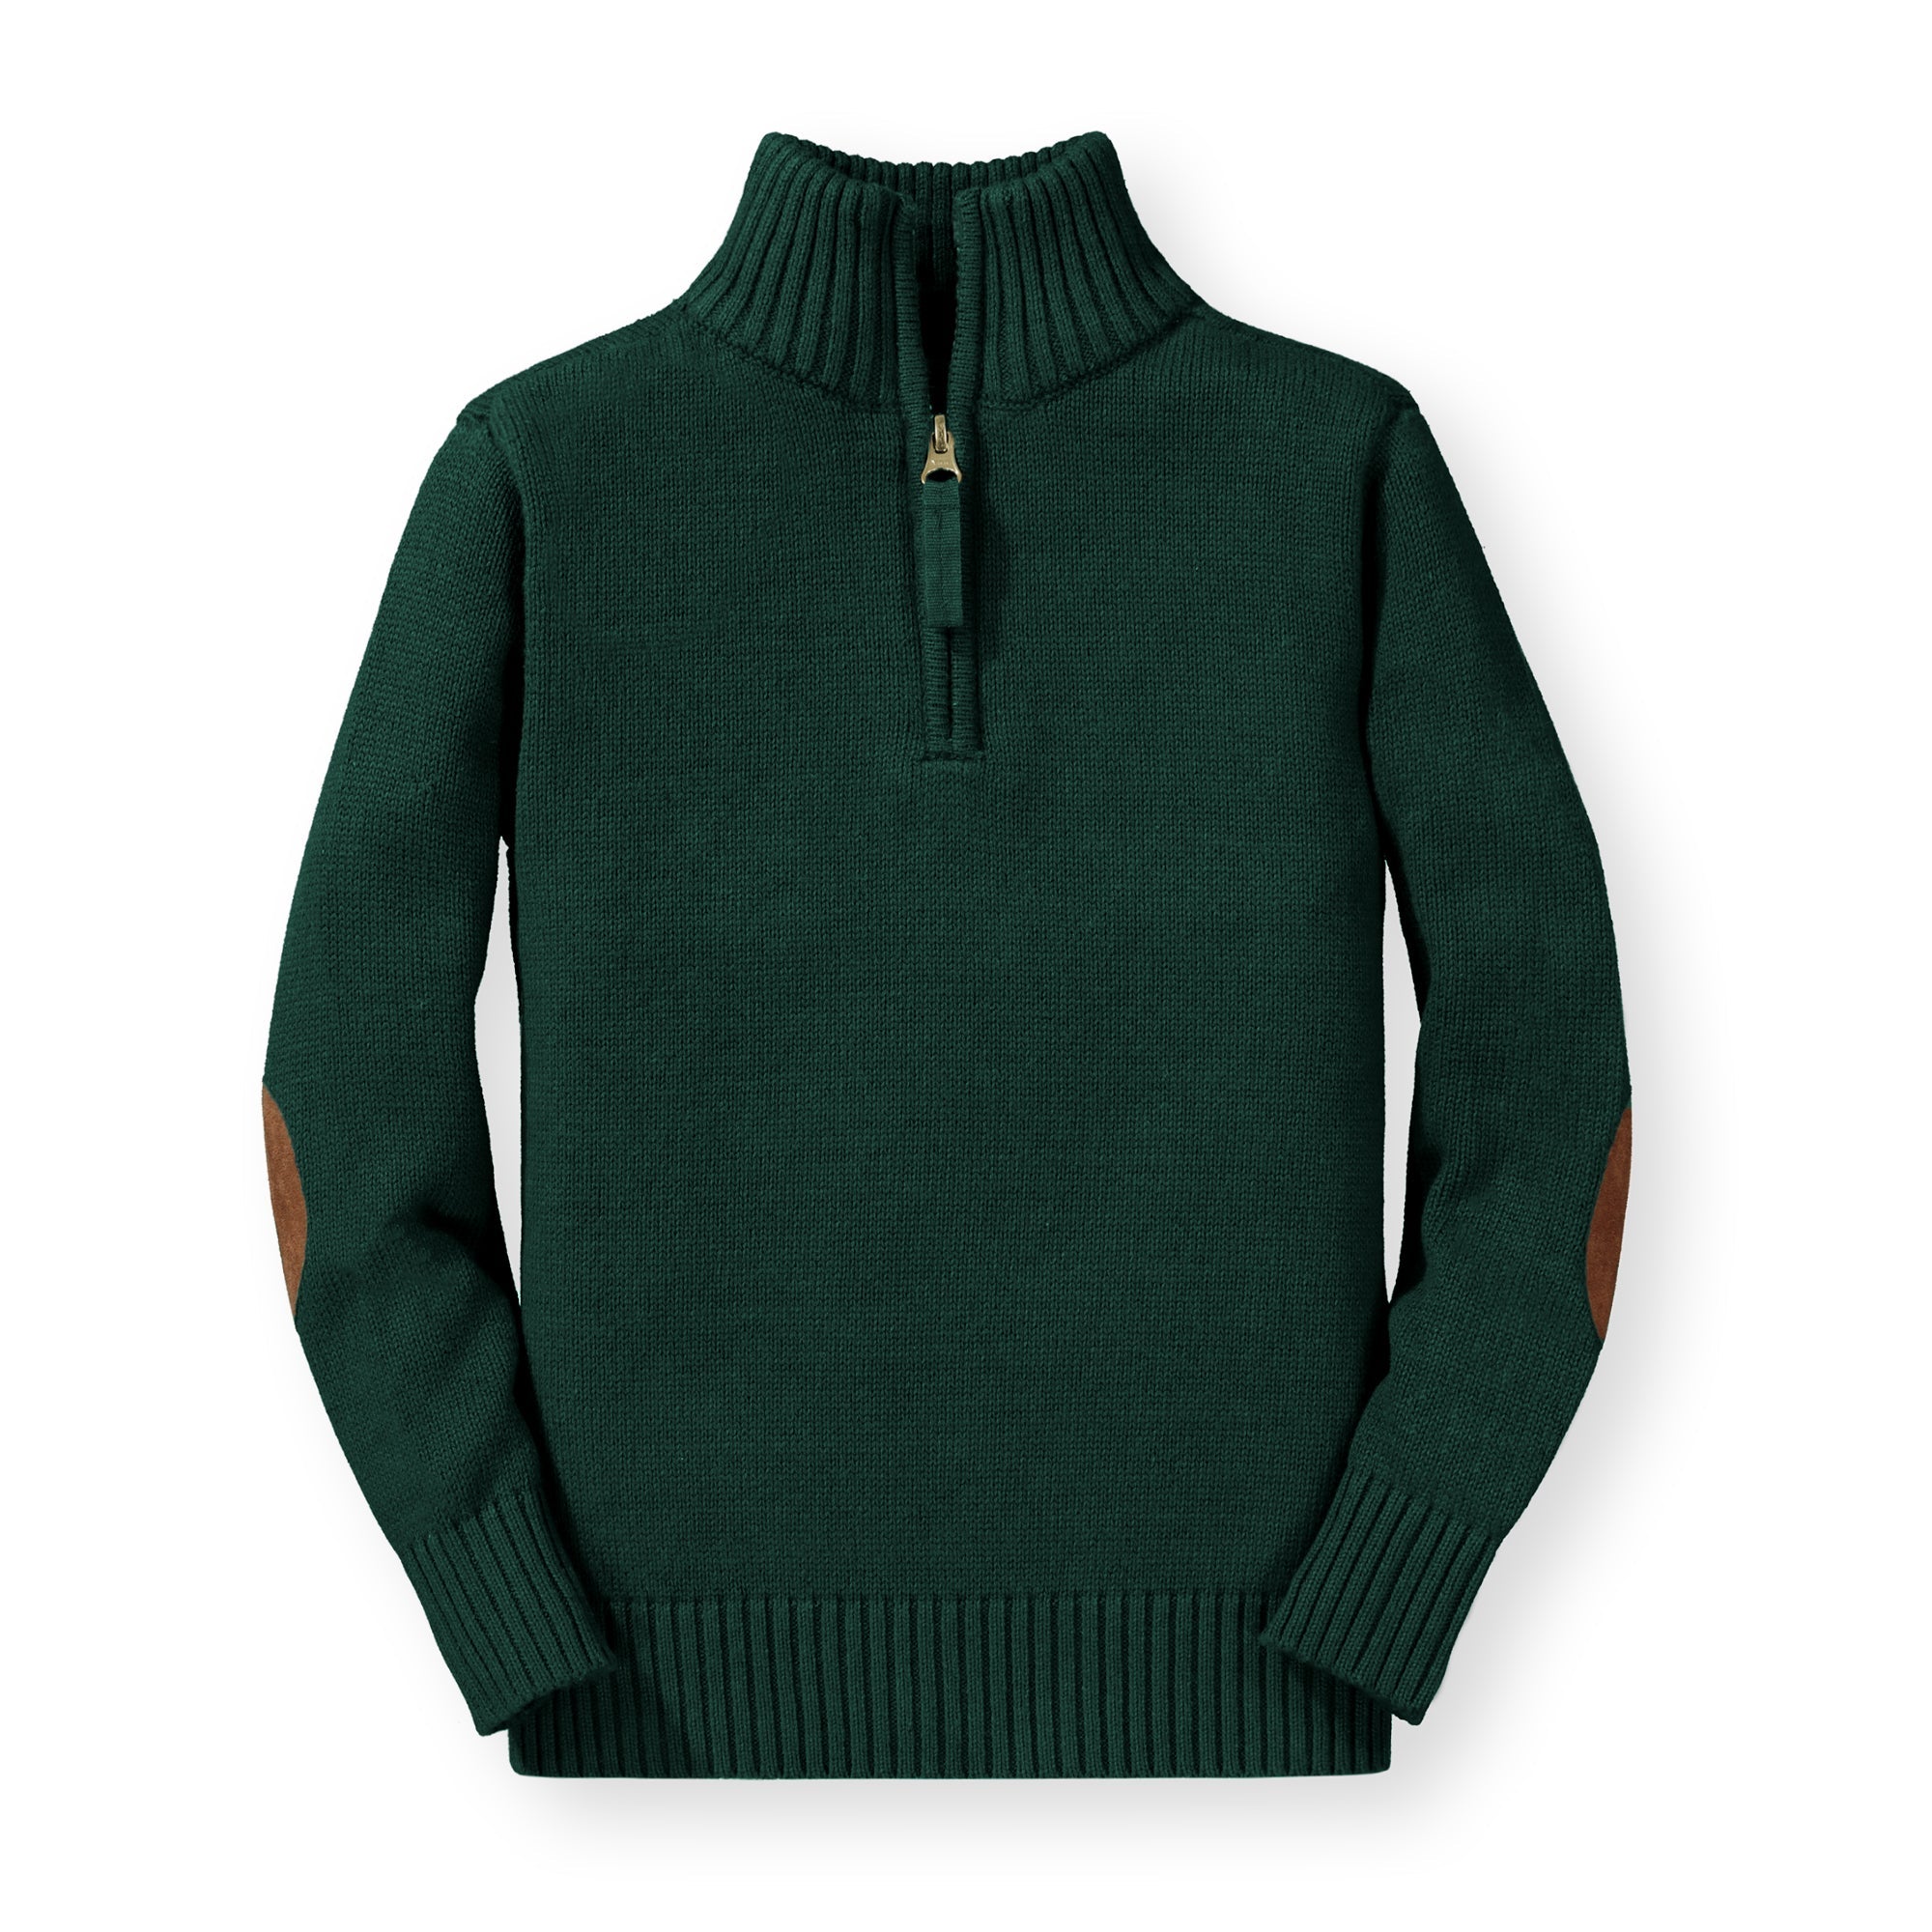 Roll neck with elbow patches from Merino wool - GREEN ROSE